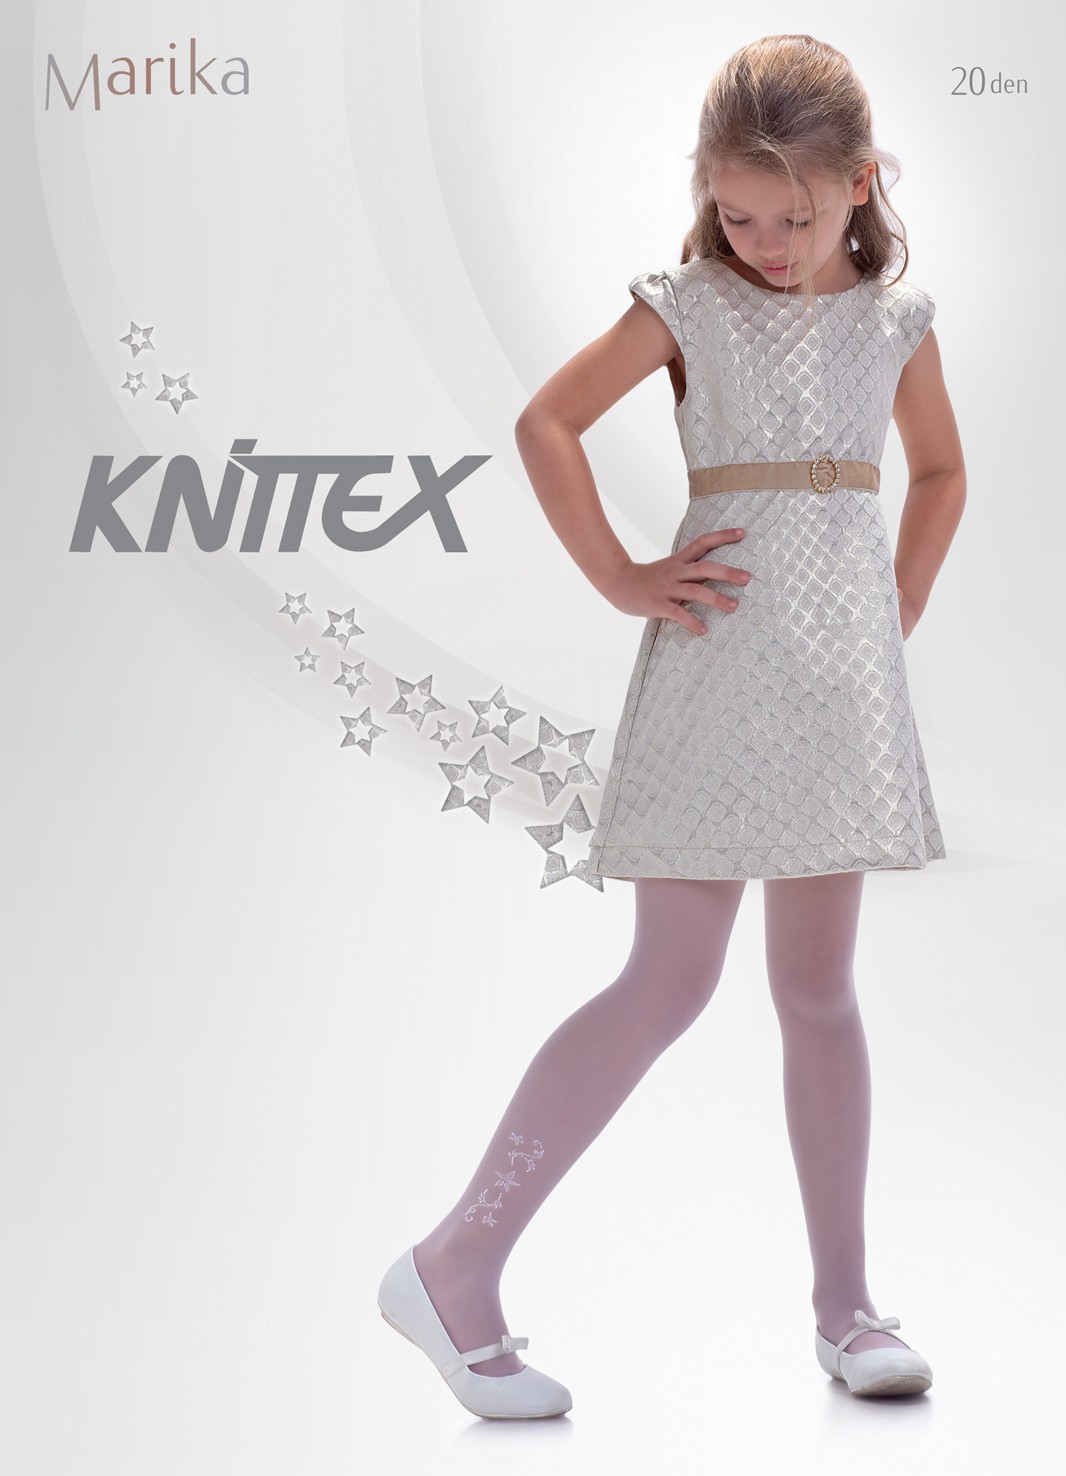 Girls White Tights By Knittex  SISI 40 Den Microfibre Puppy Pattern New 